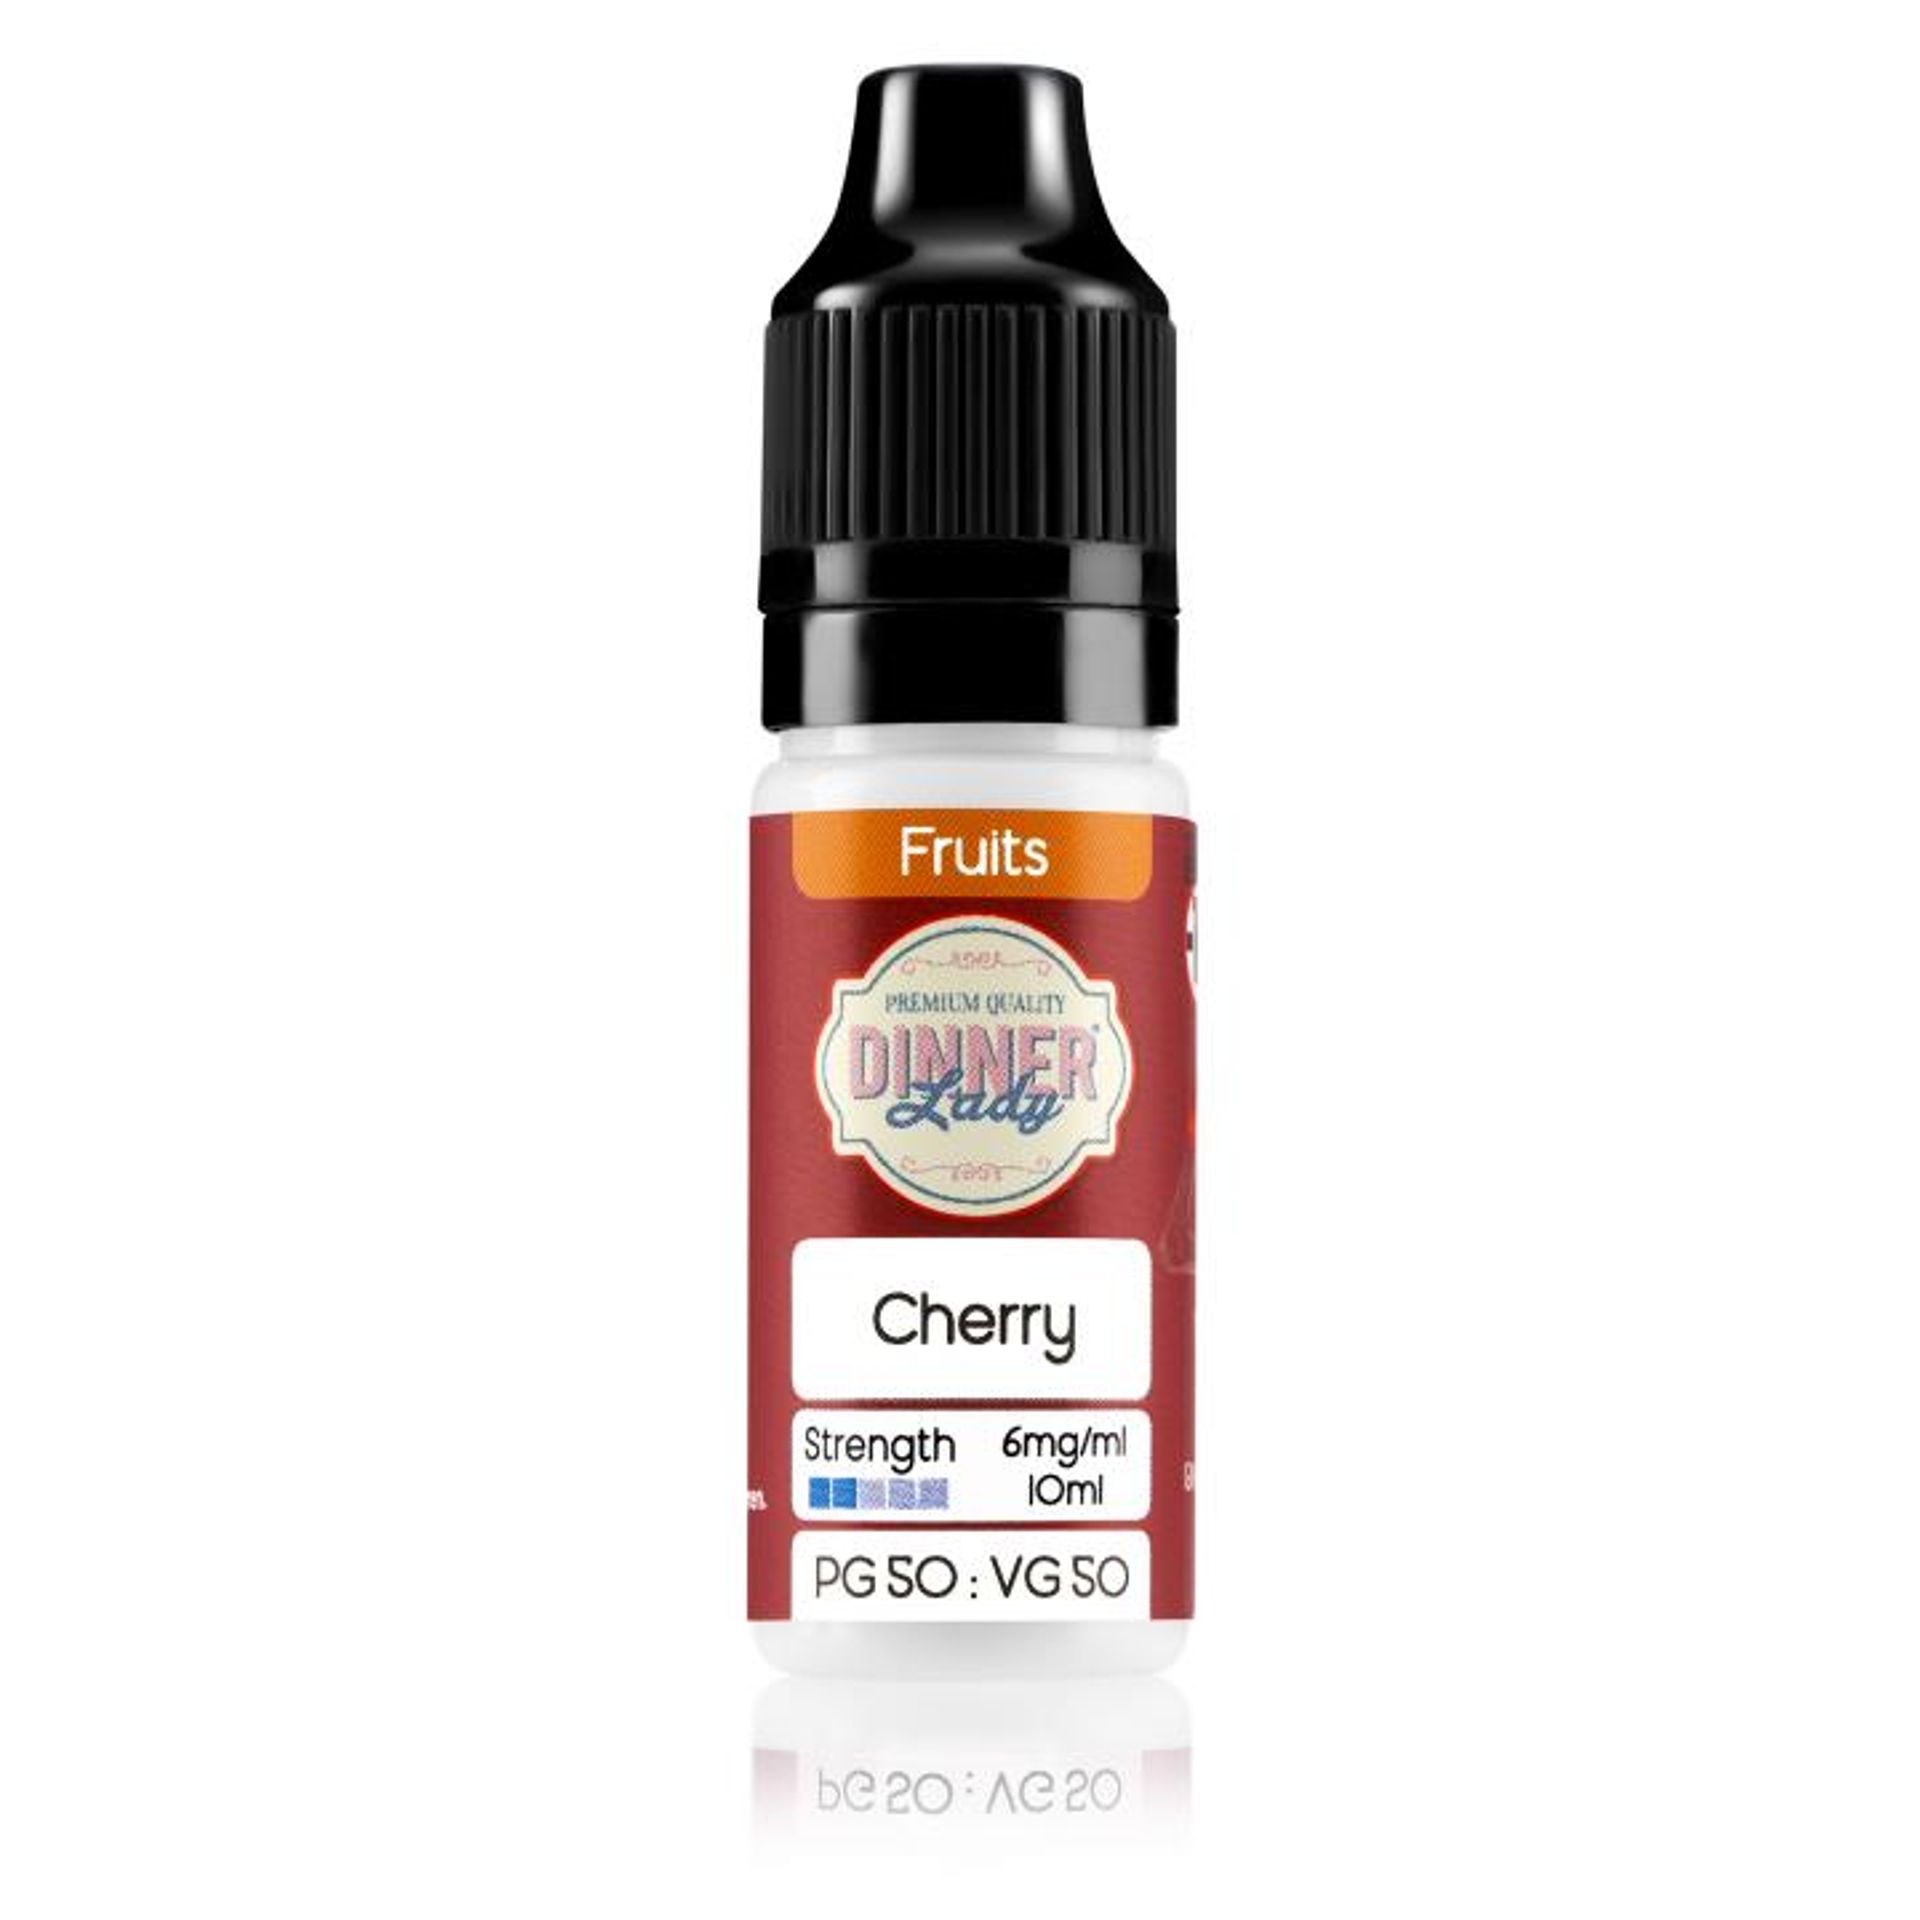 Image of Cherry by Dinner Lady